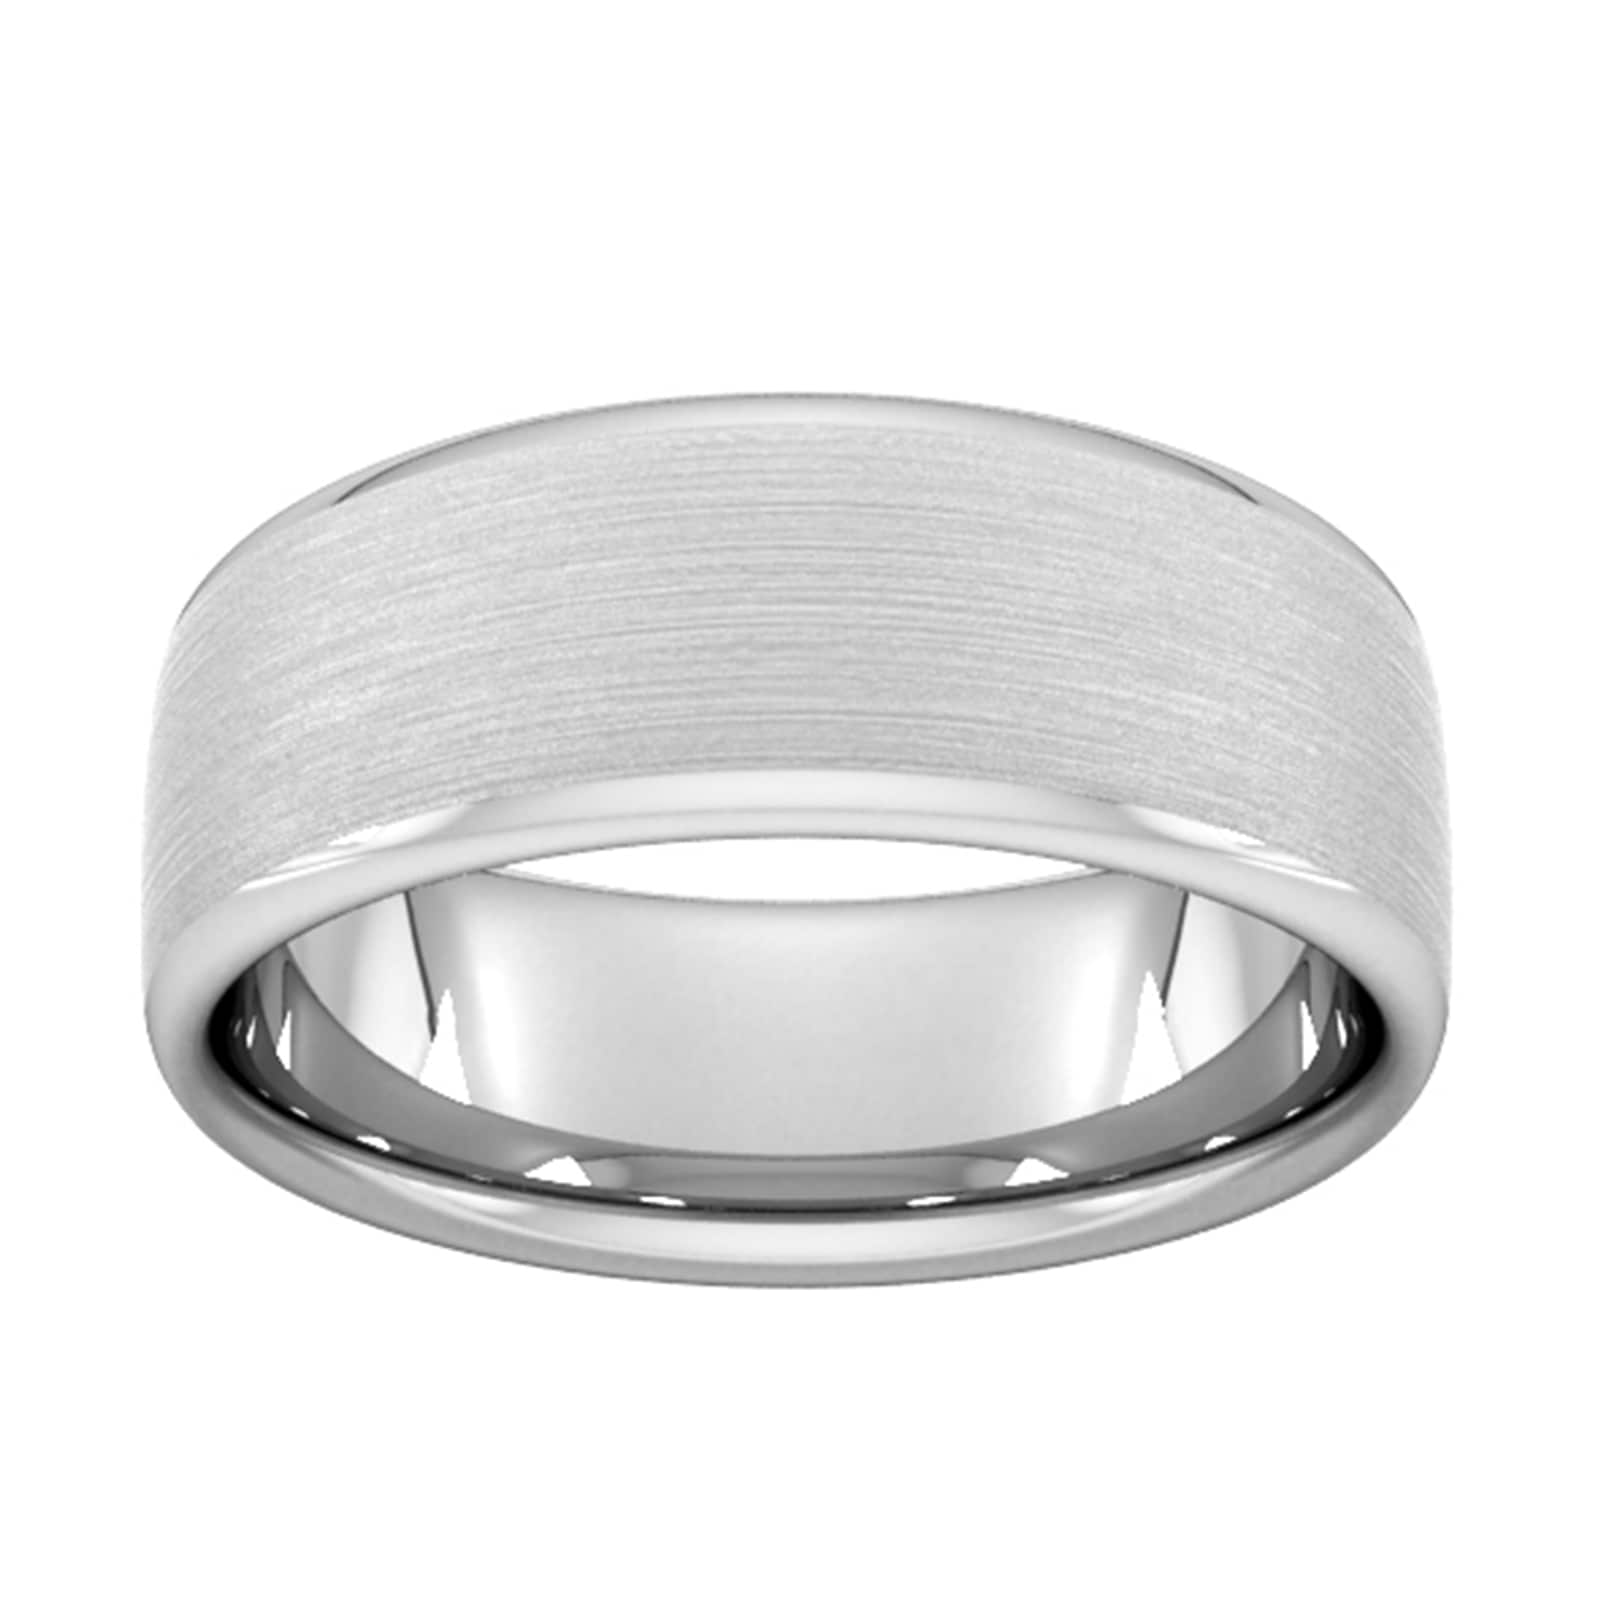 8mm Flat Court Heavy Matt Finished Wedding Ring In 9 Carat White Gold - Ring Size Y